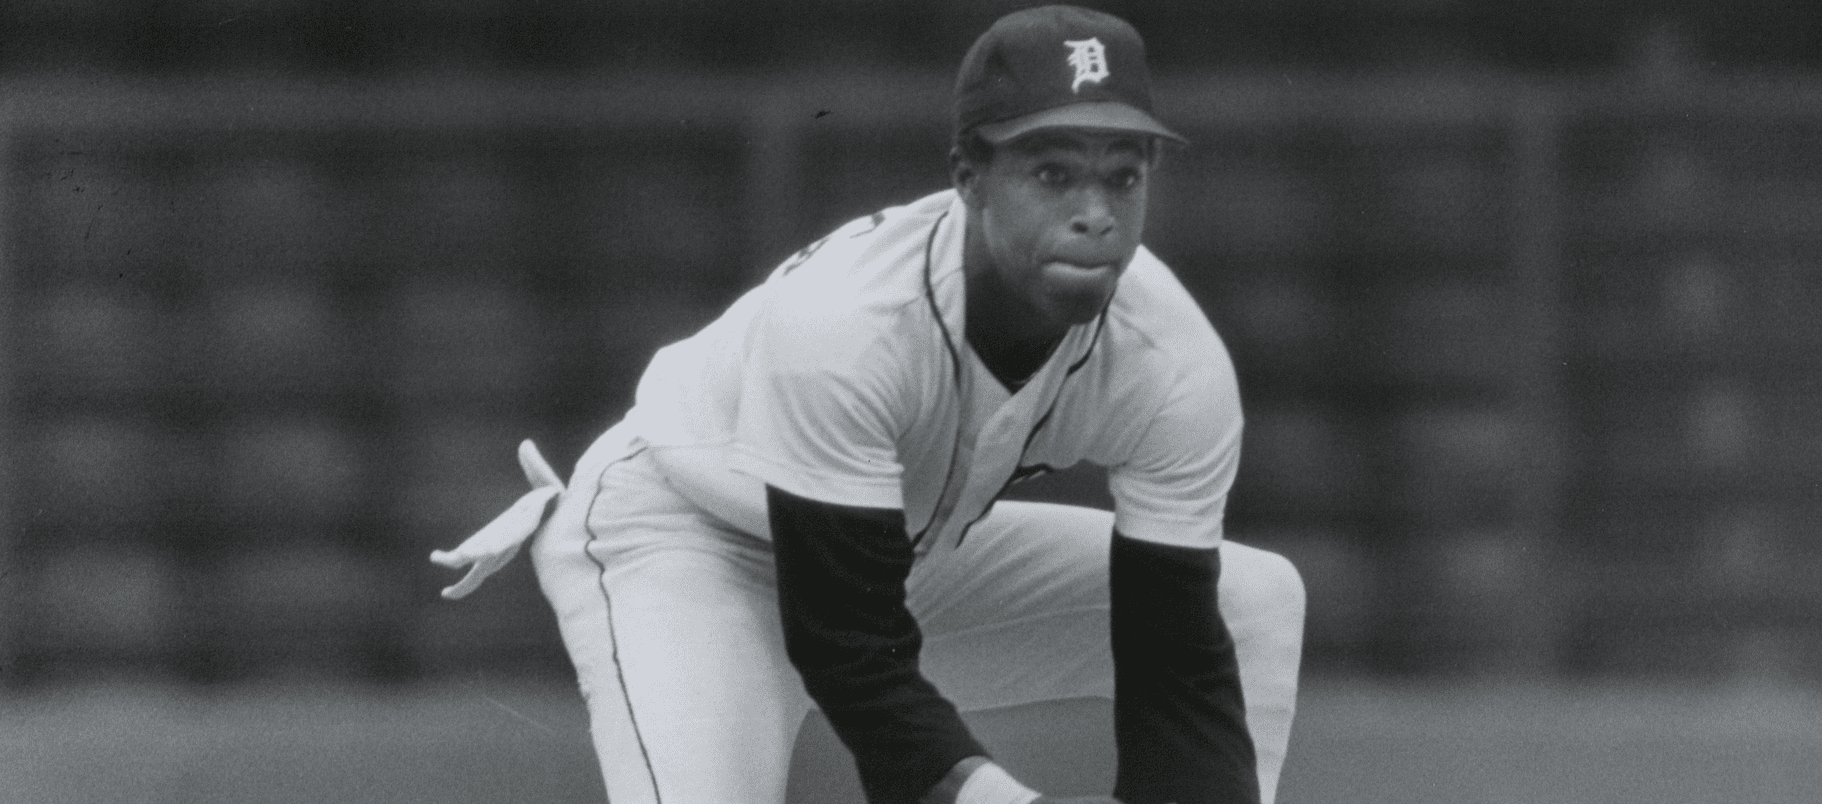 Detroit Tigers finally announce date for Lou Whitaker's no. 1